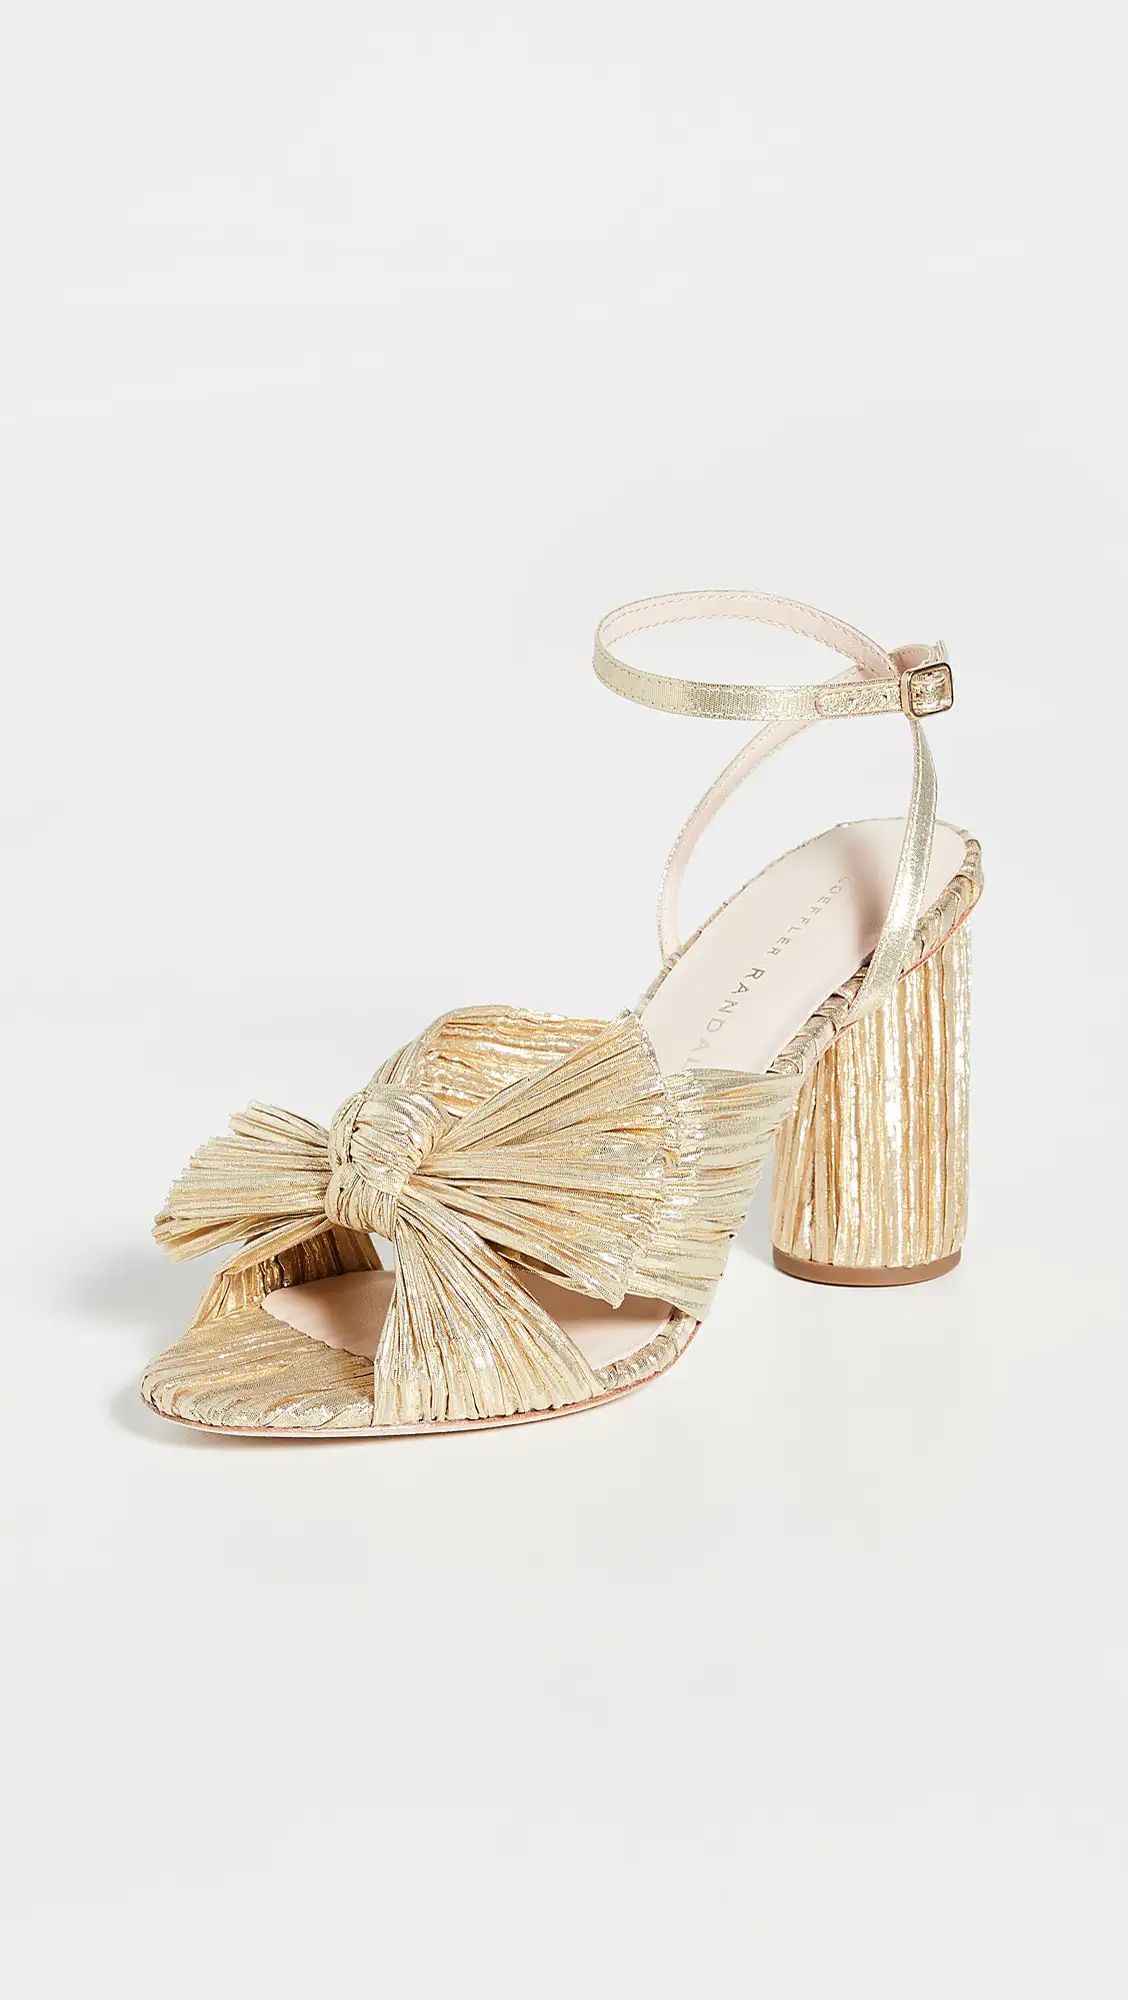 Loeffler Randall Camellia Gold Pleated Bow Heel with Ankle Strap | Shopbop | Shopbop